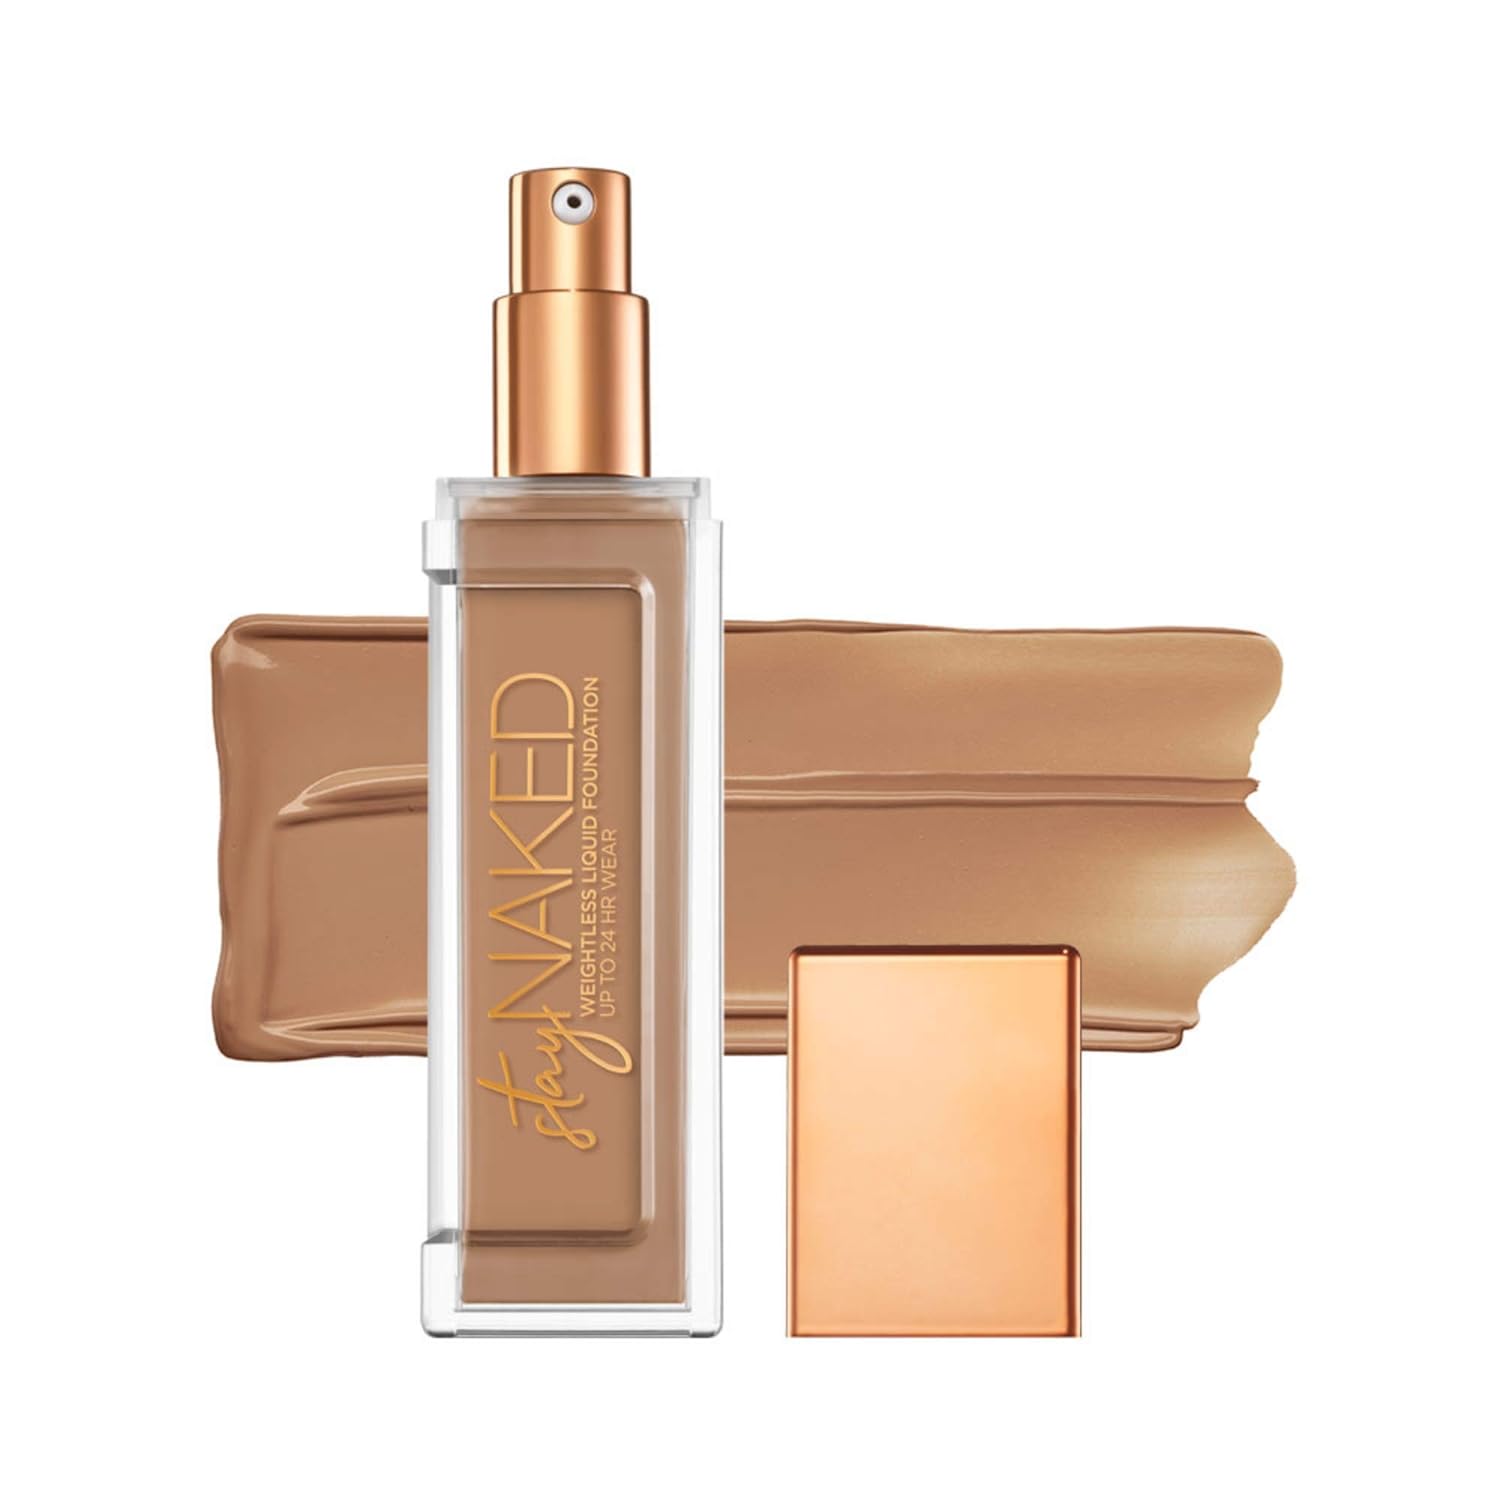 Urban Decay Stay Naked Liquid Foundation